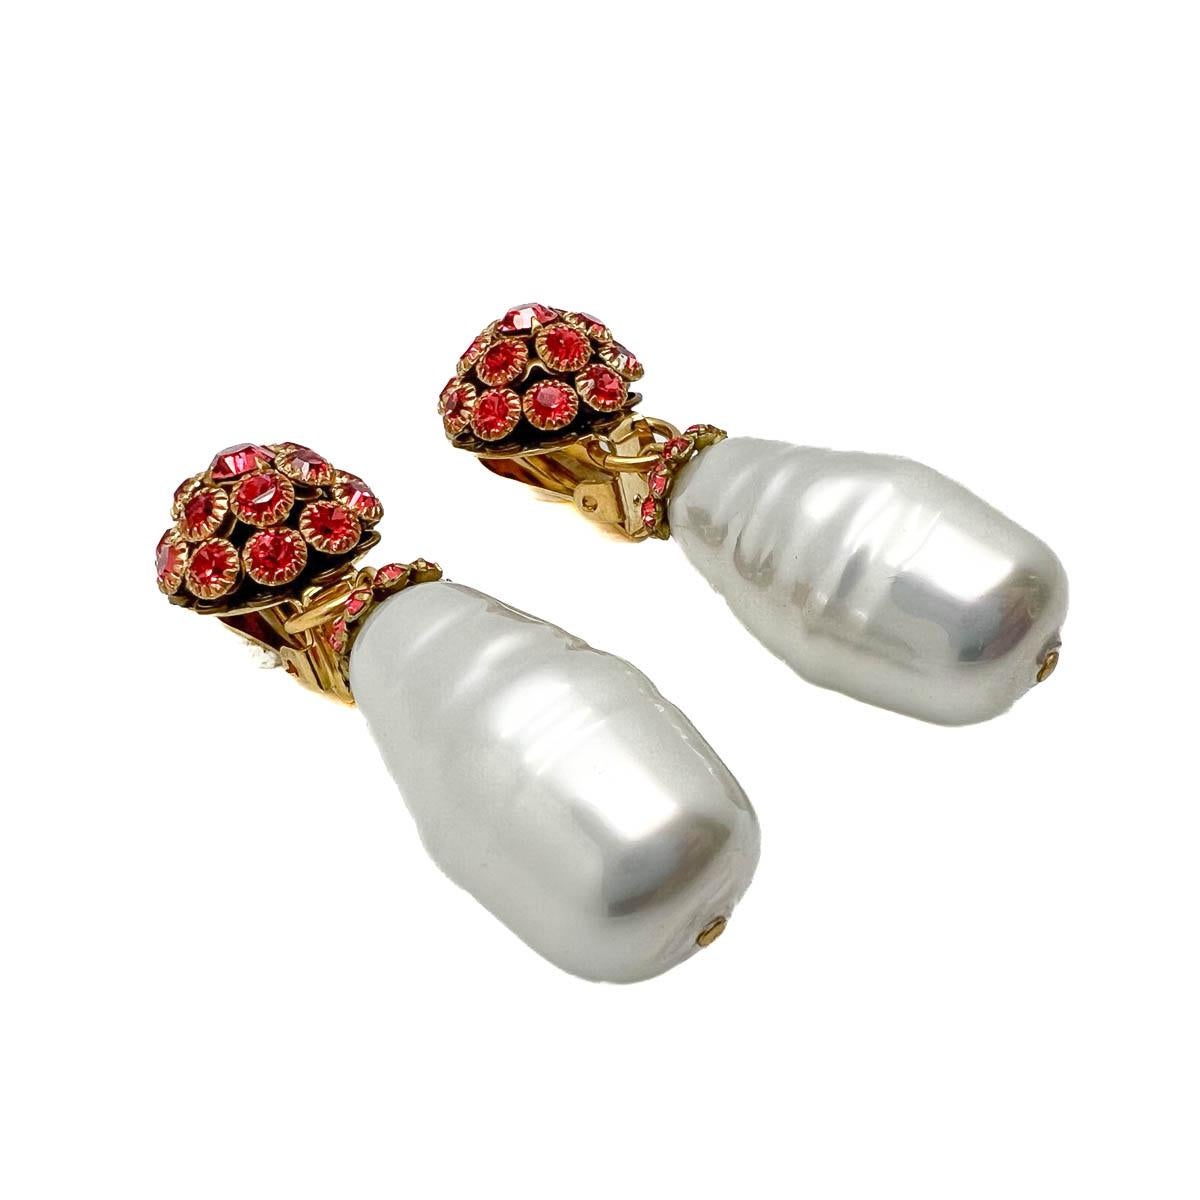 A pair of Vintage Baroque Pearl & Salmon Pink Crystal Earrings. A delightful hue of intense salmon pink sparkles from the crystals and a large baroque pearl drop finishing the earring taking them to another level. Delicate yet imposing, a winning